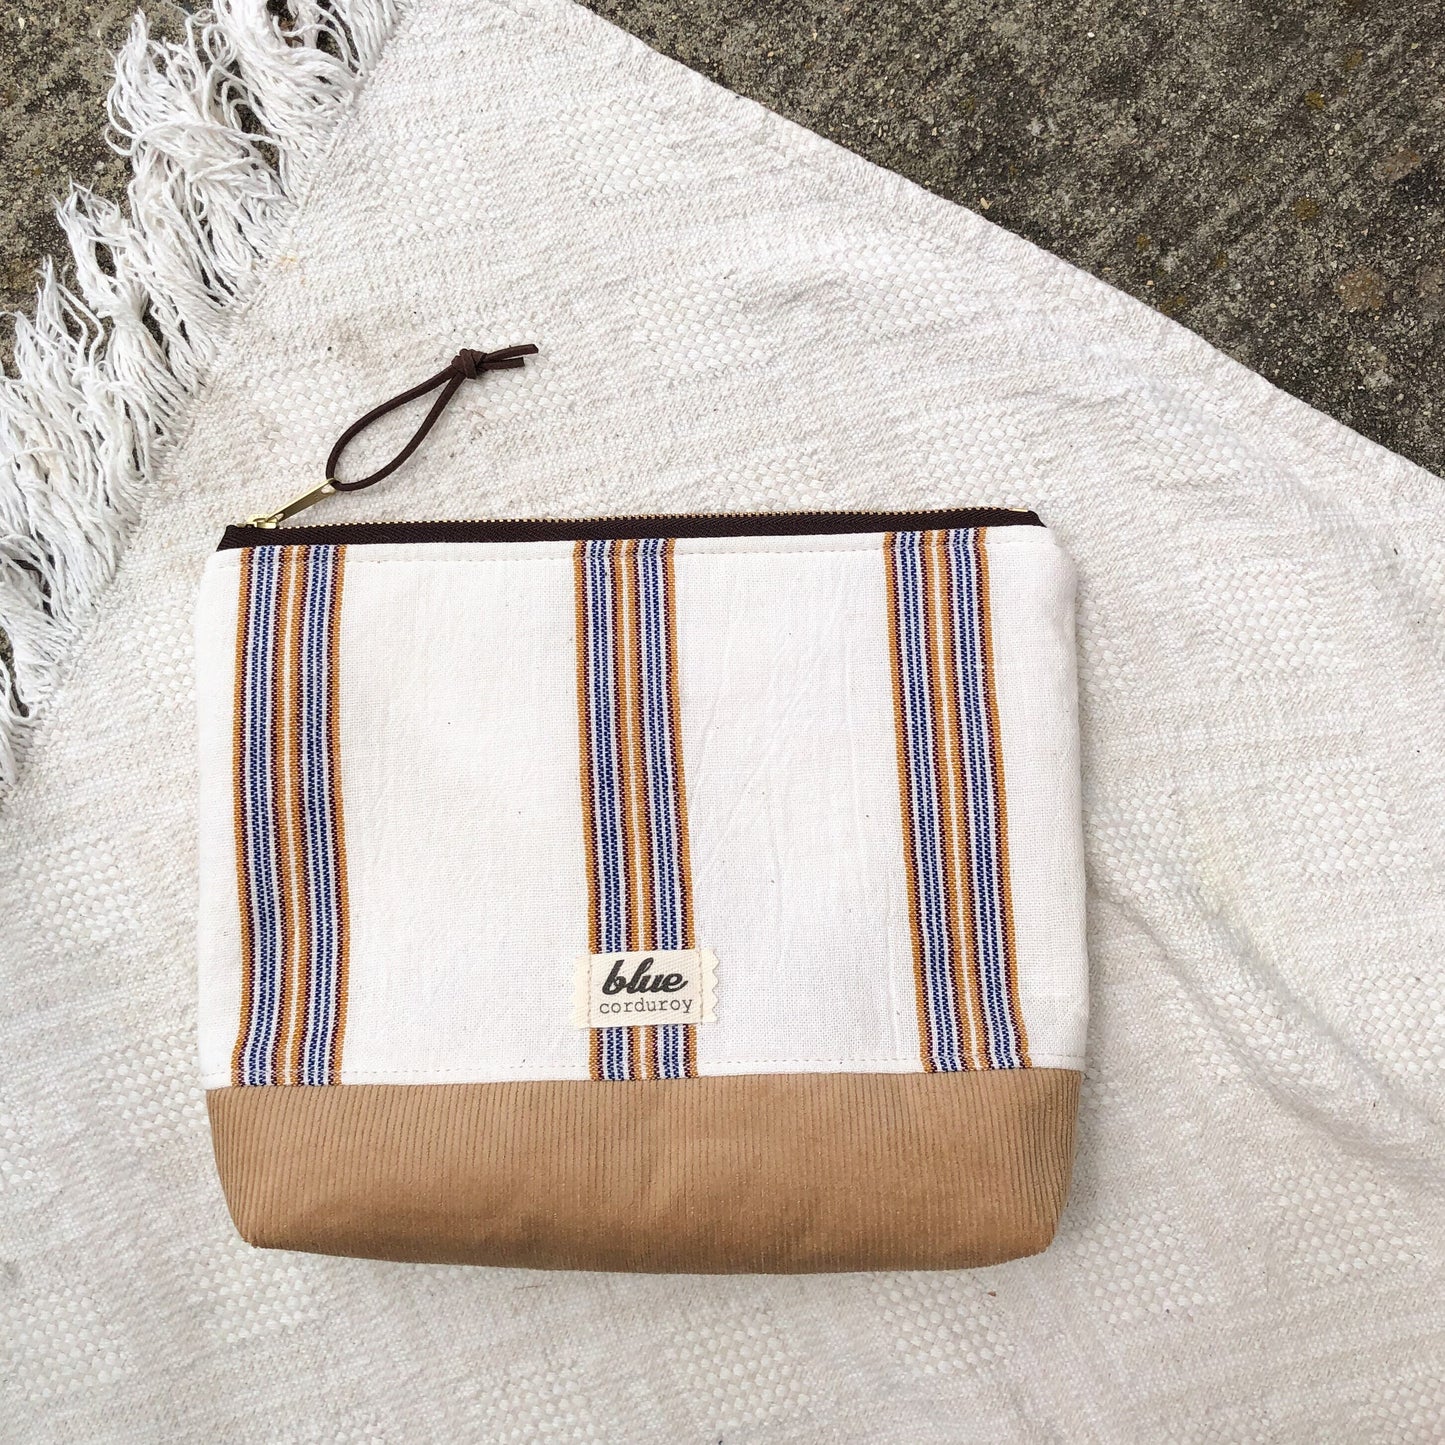 Zipper travel pouch with Blue and tan woven stripes on white background with tan corduroy at bottom laying on white fringe blanket